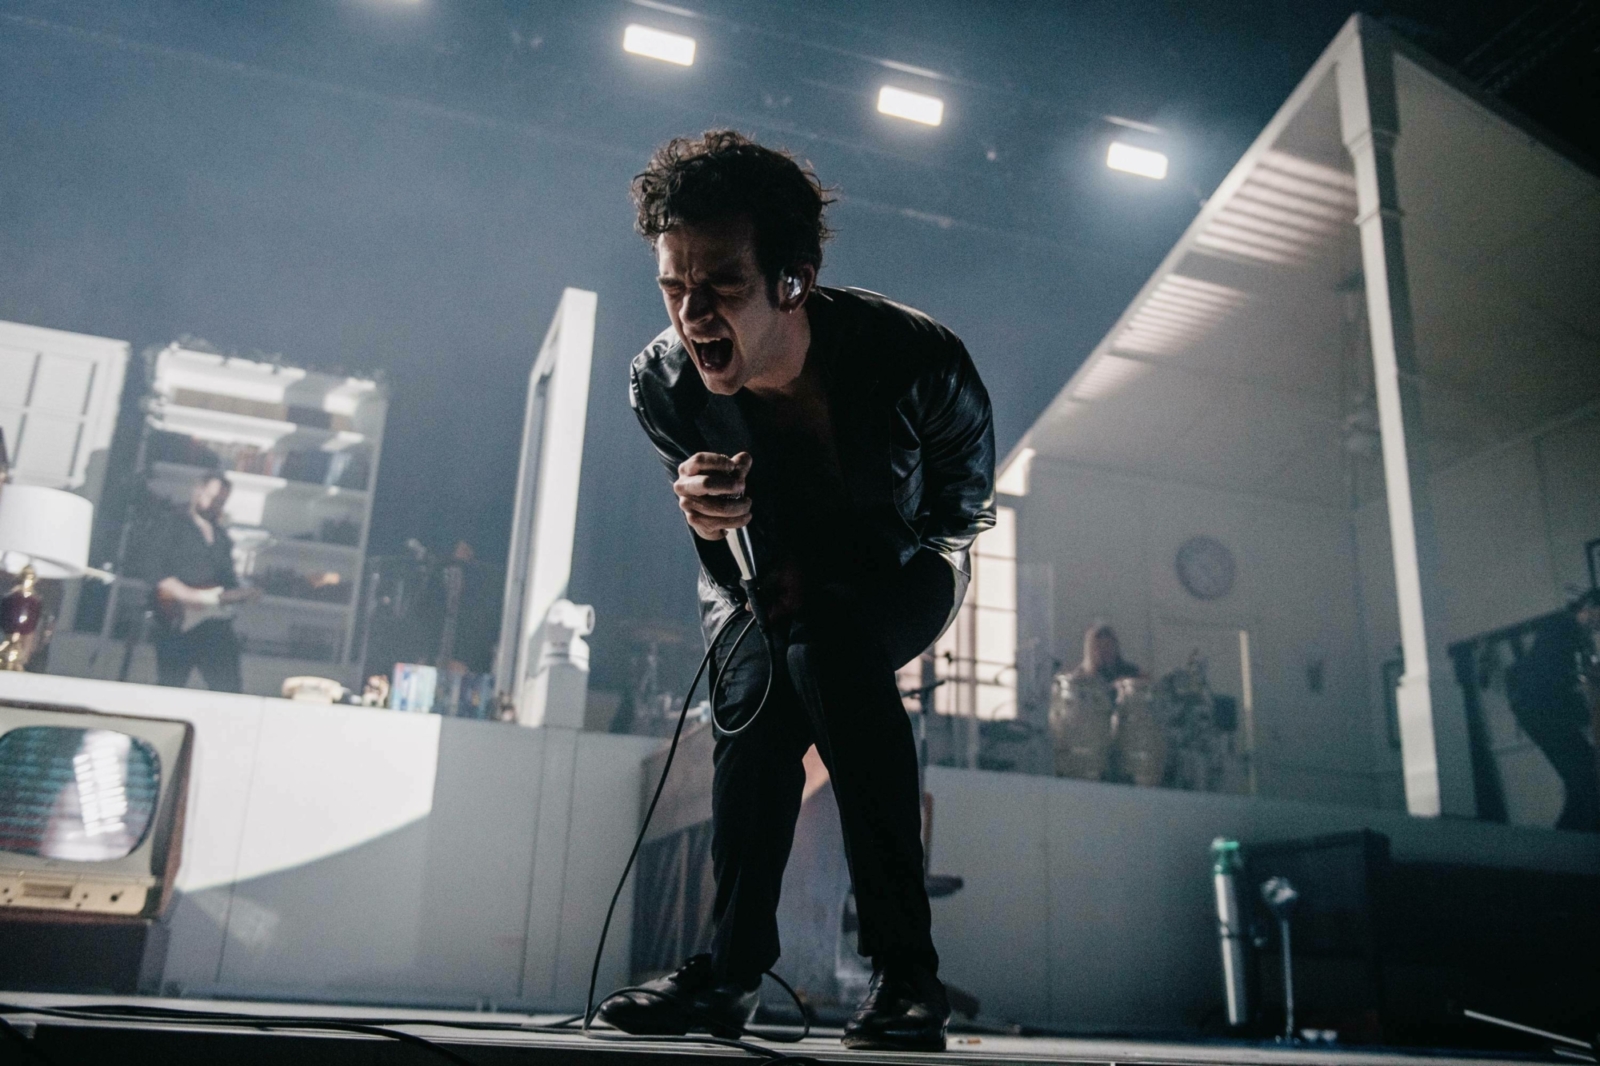 The 1975 schedule huge Finsbury Park show for this summer